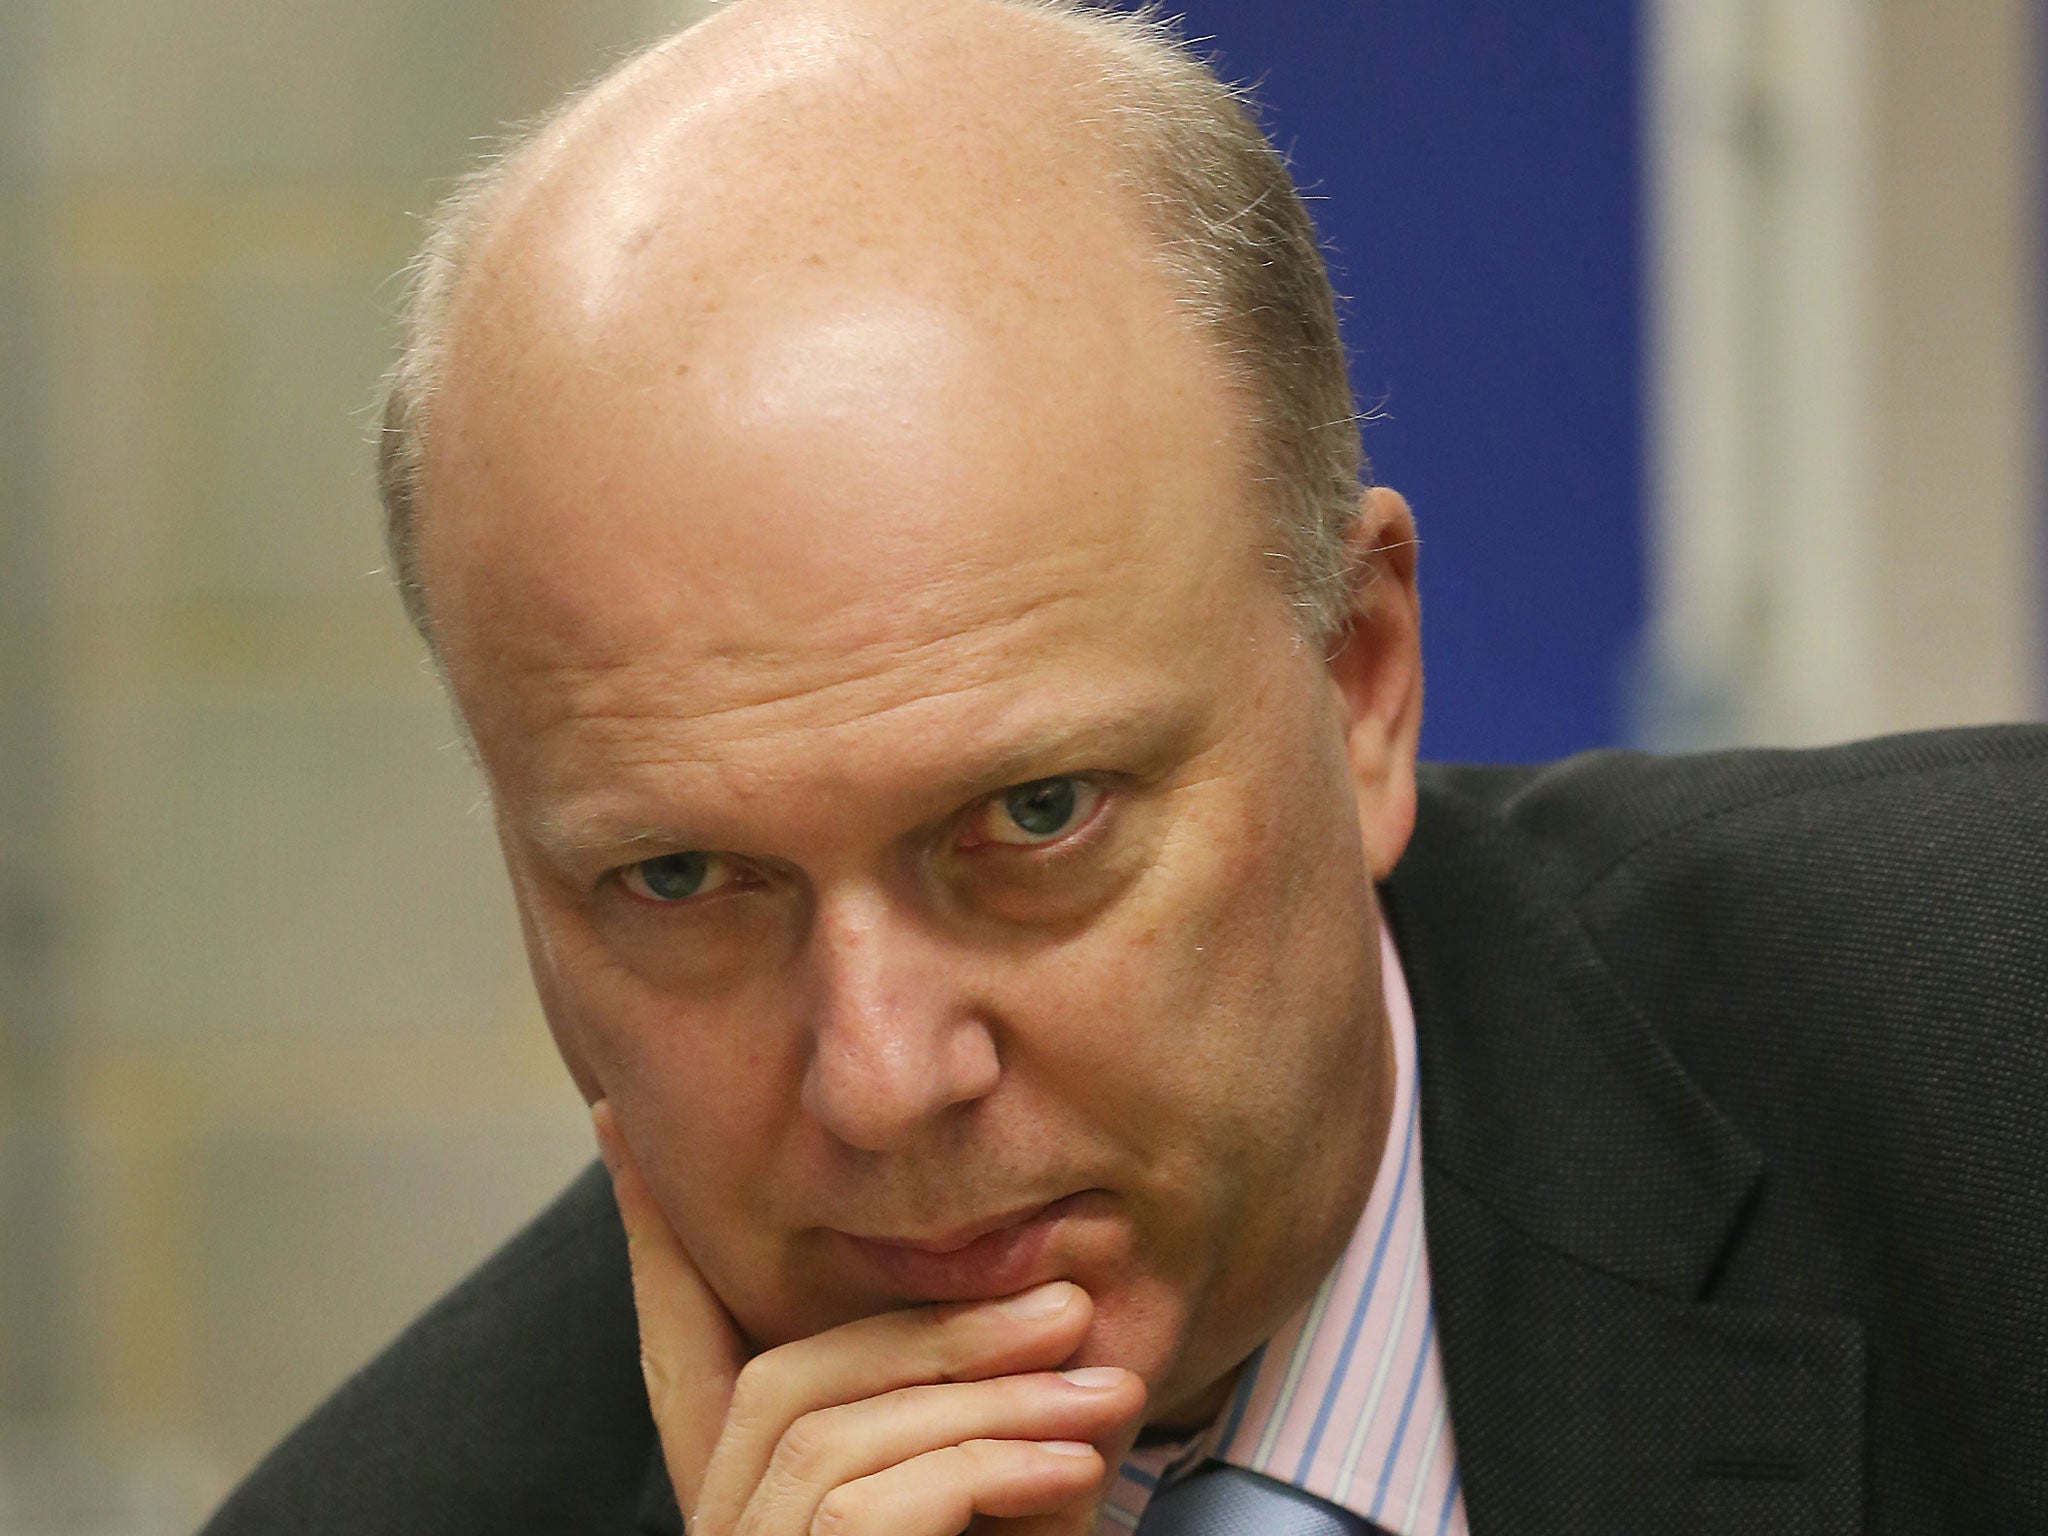 Chris Grayling will introduce bill to prevent child rapists and terrorists from being released automatically at the halfway point of their prison sentence